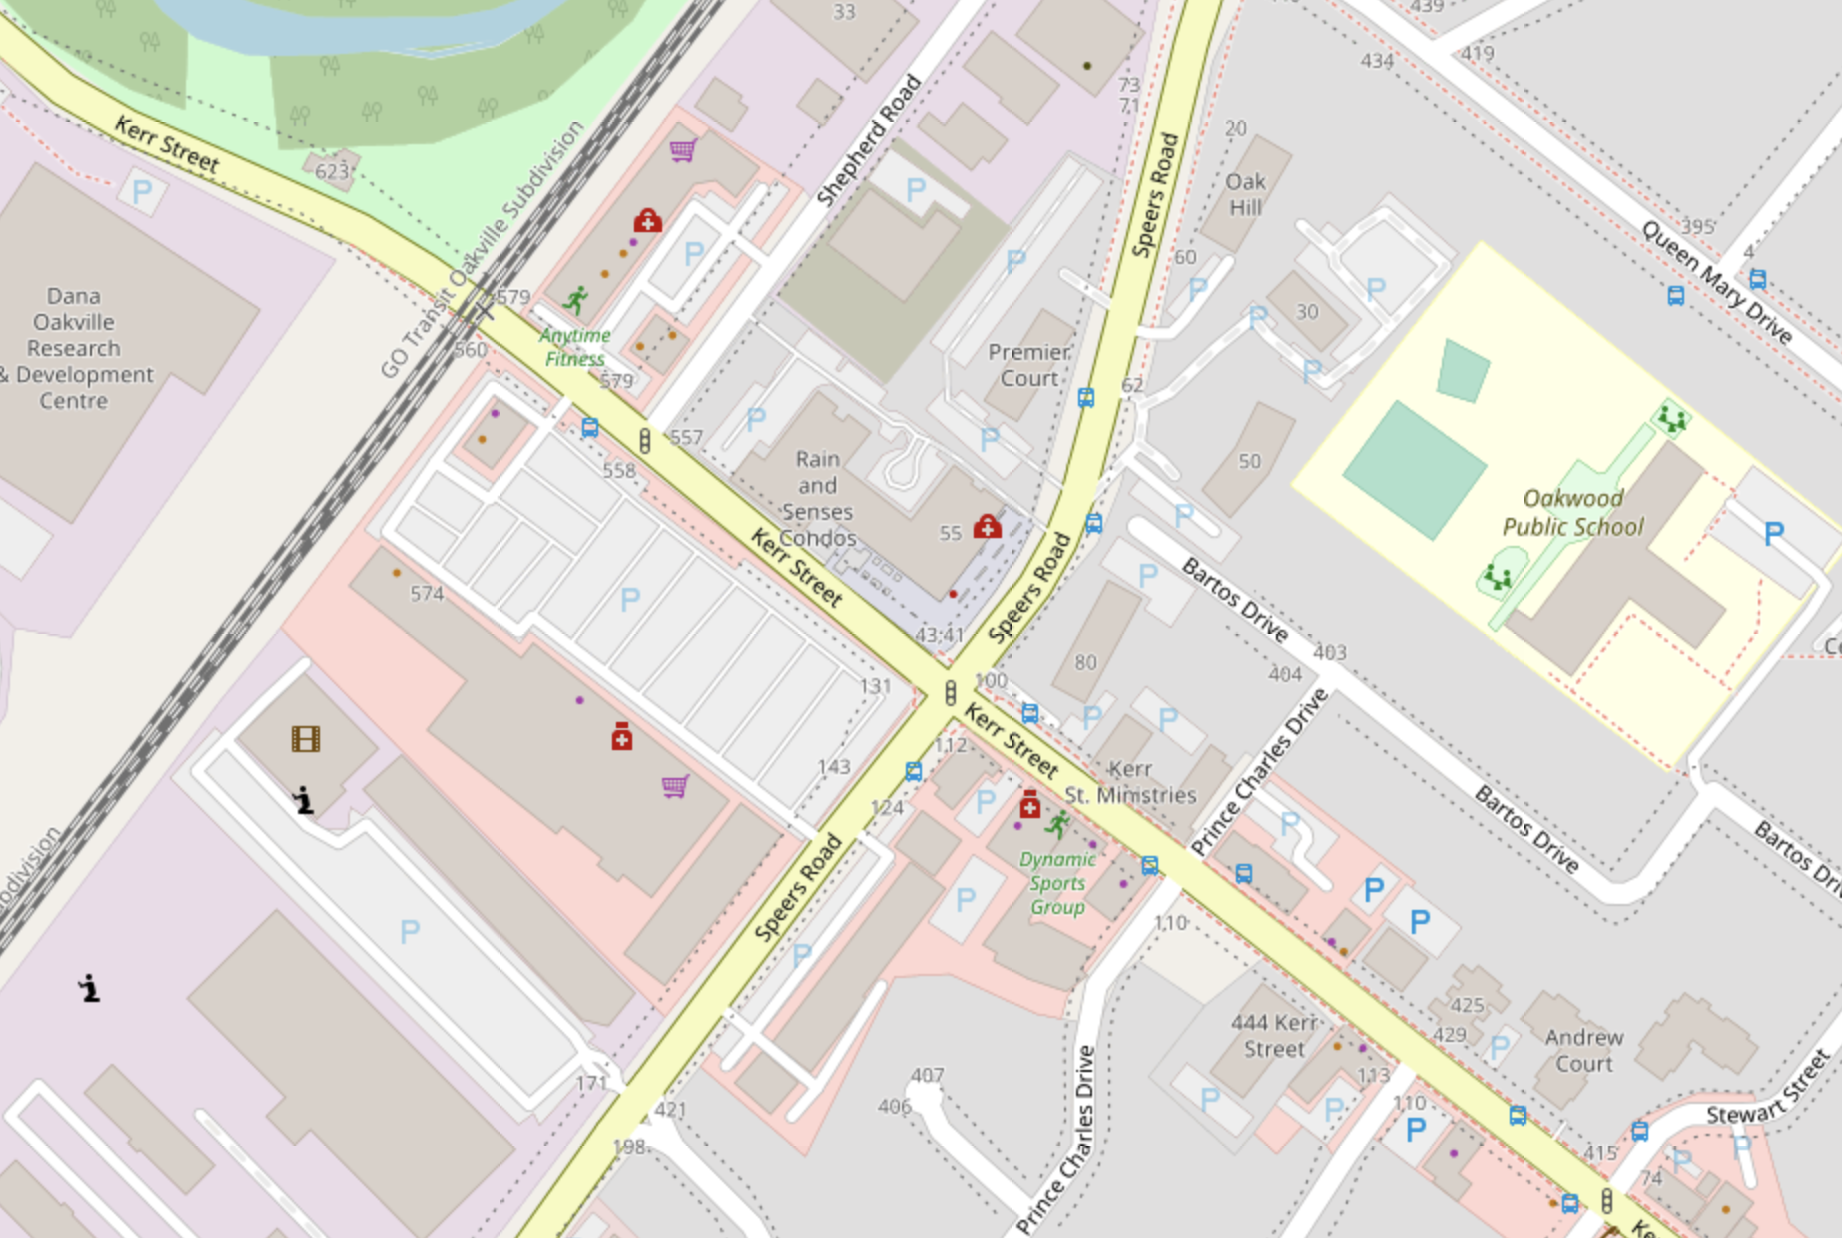 Kerr St and Speers Rd | Openstreetmap